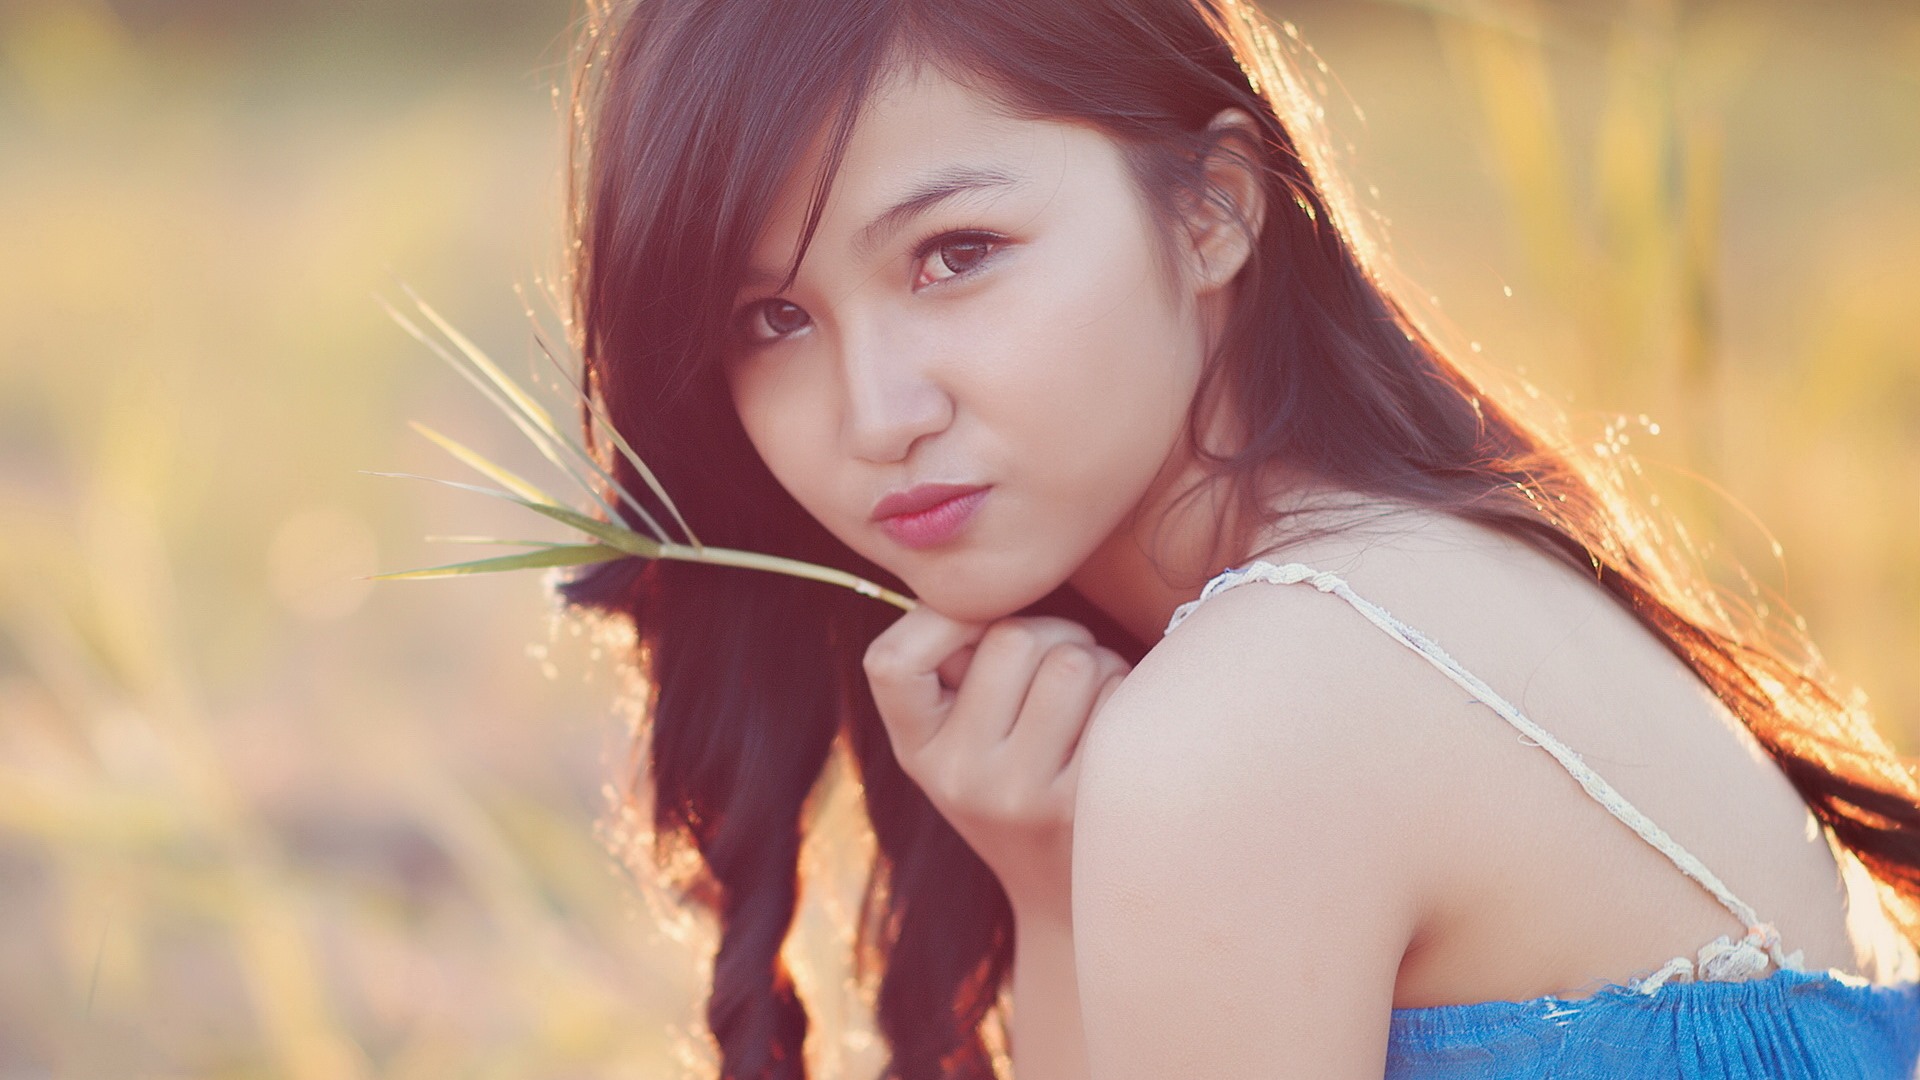 Pure and lovely young Asian girl HD wallpapers collection (5) #35 - 1920x1080